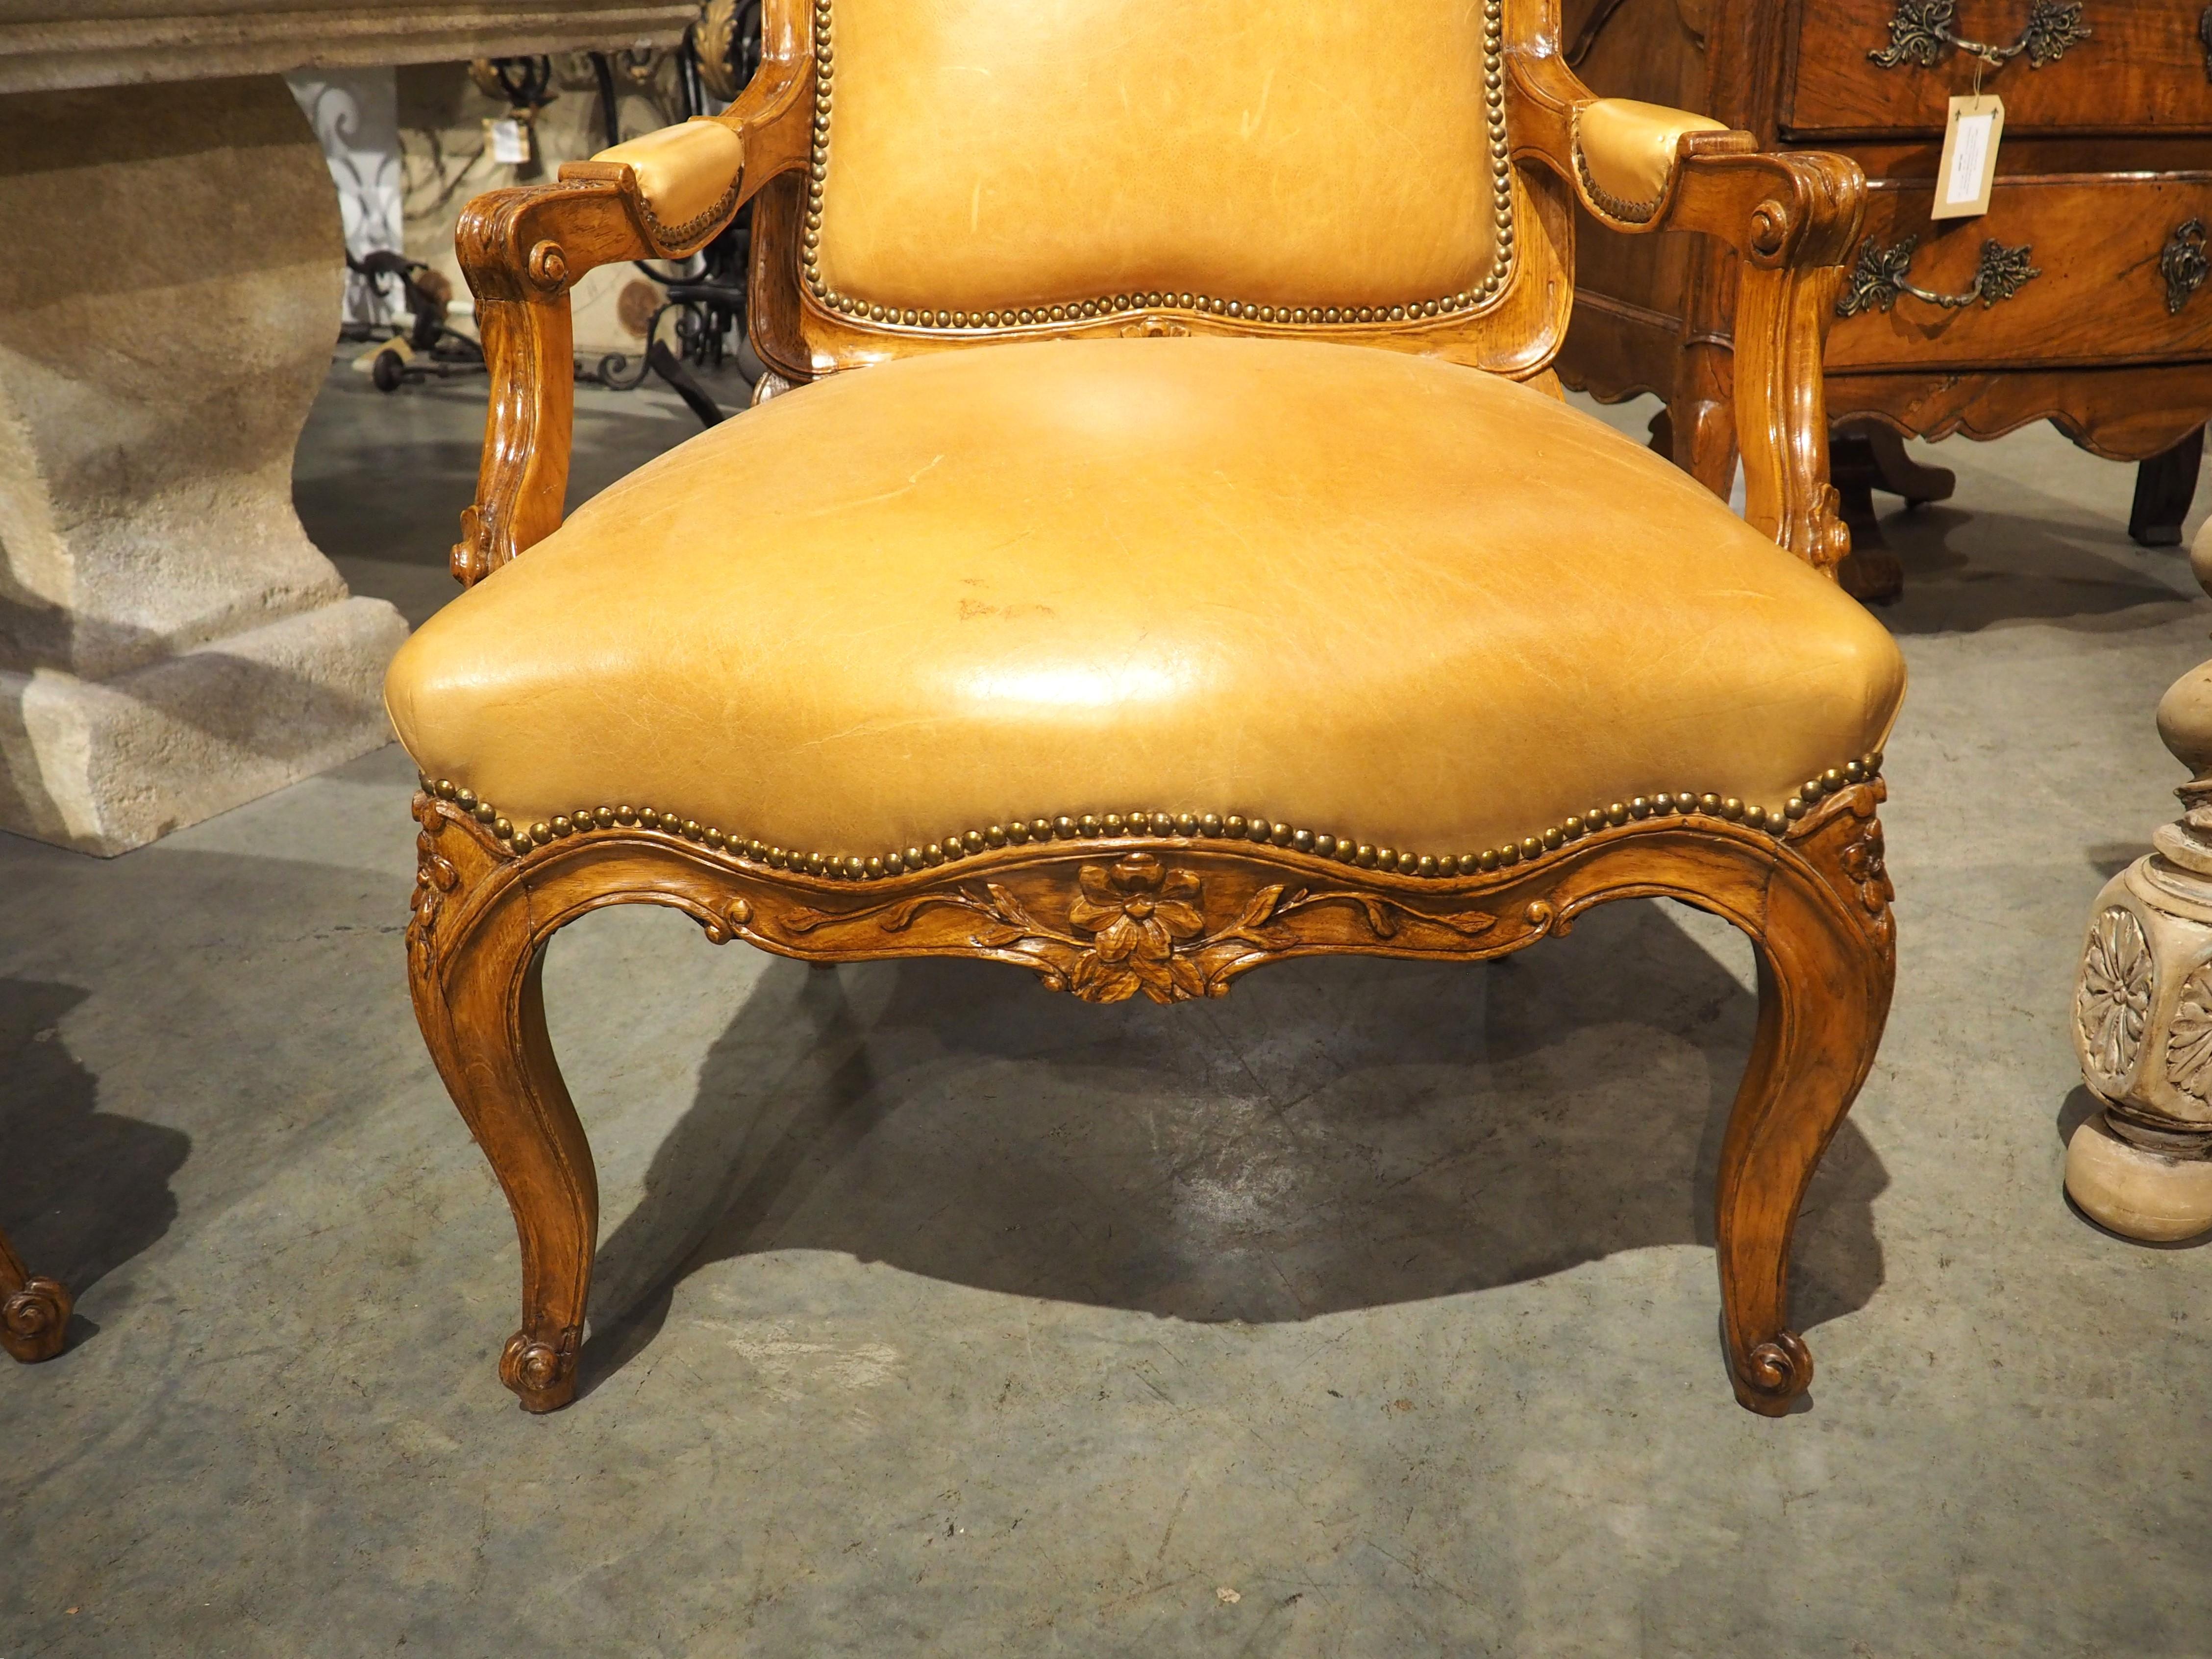 Pair of French Carved Regence Style Armchairs with Leather Upholstery, C. 1900 For Sale 1